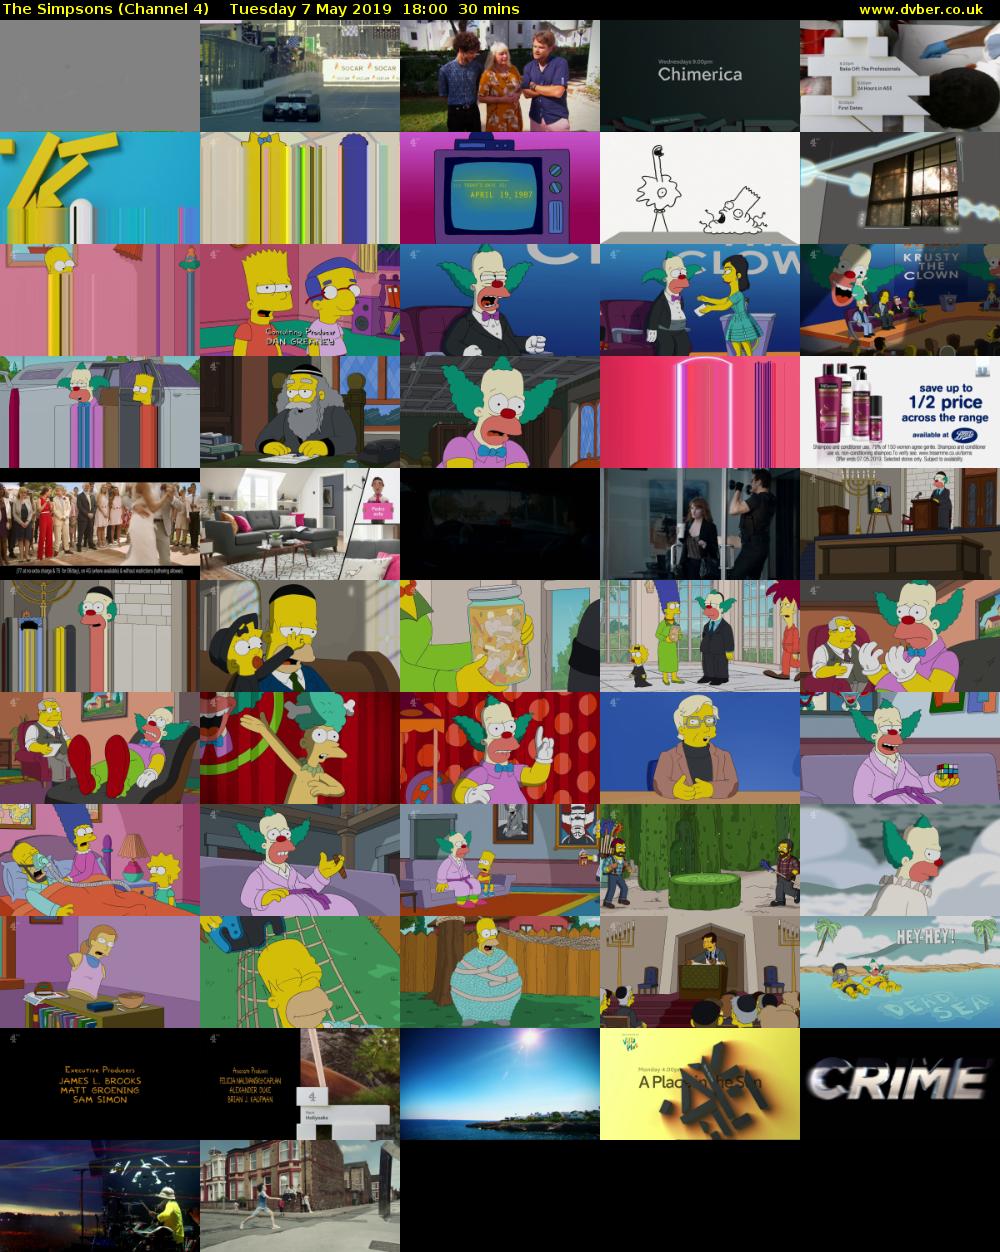 The Simpsons (Channel 4) Tuesday 7 May 2019 18:00 - 18:30